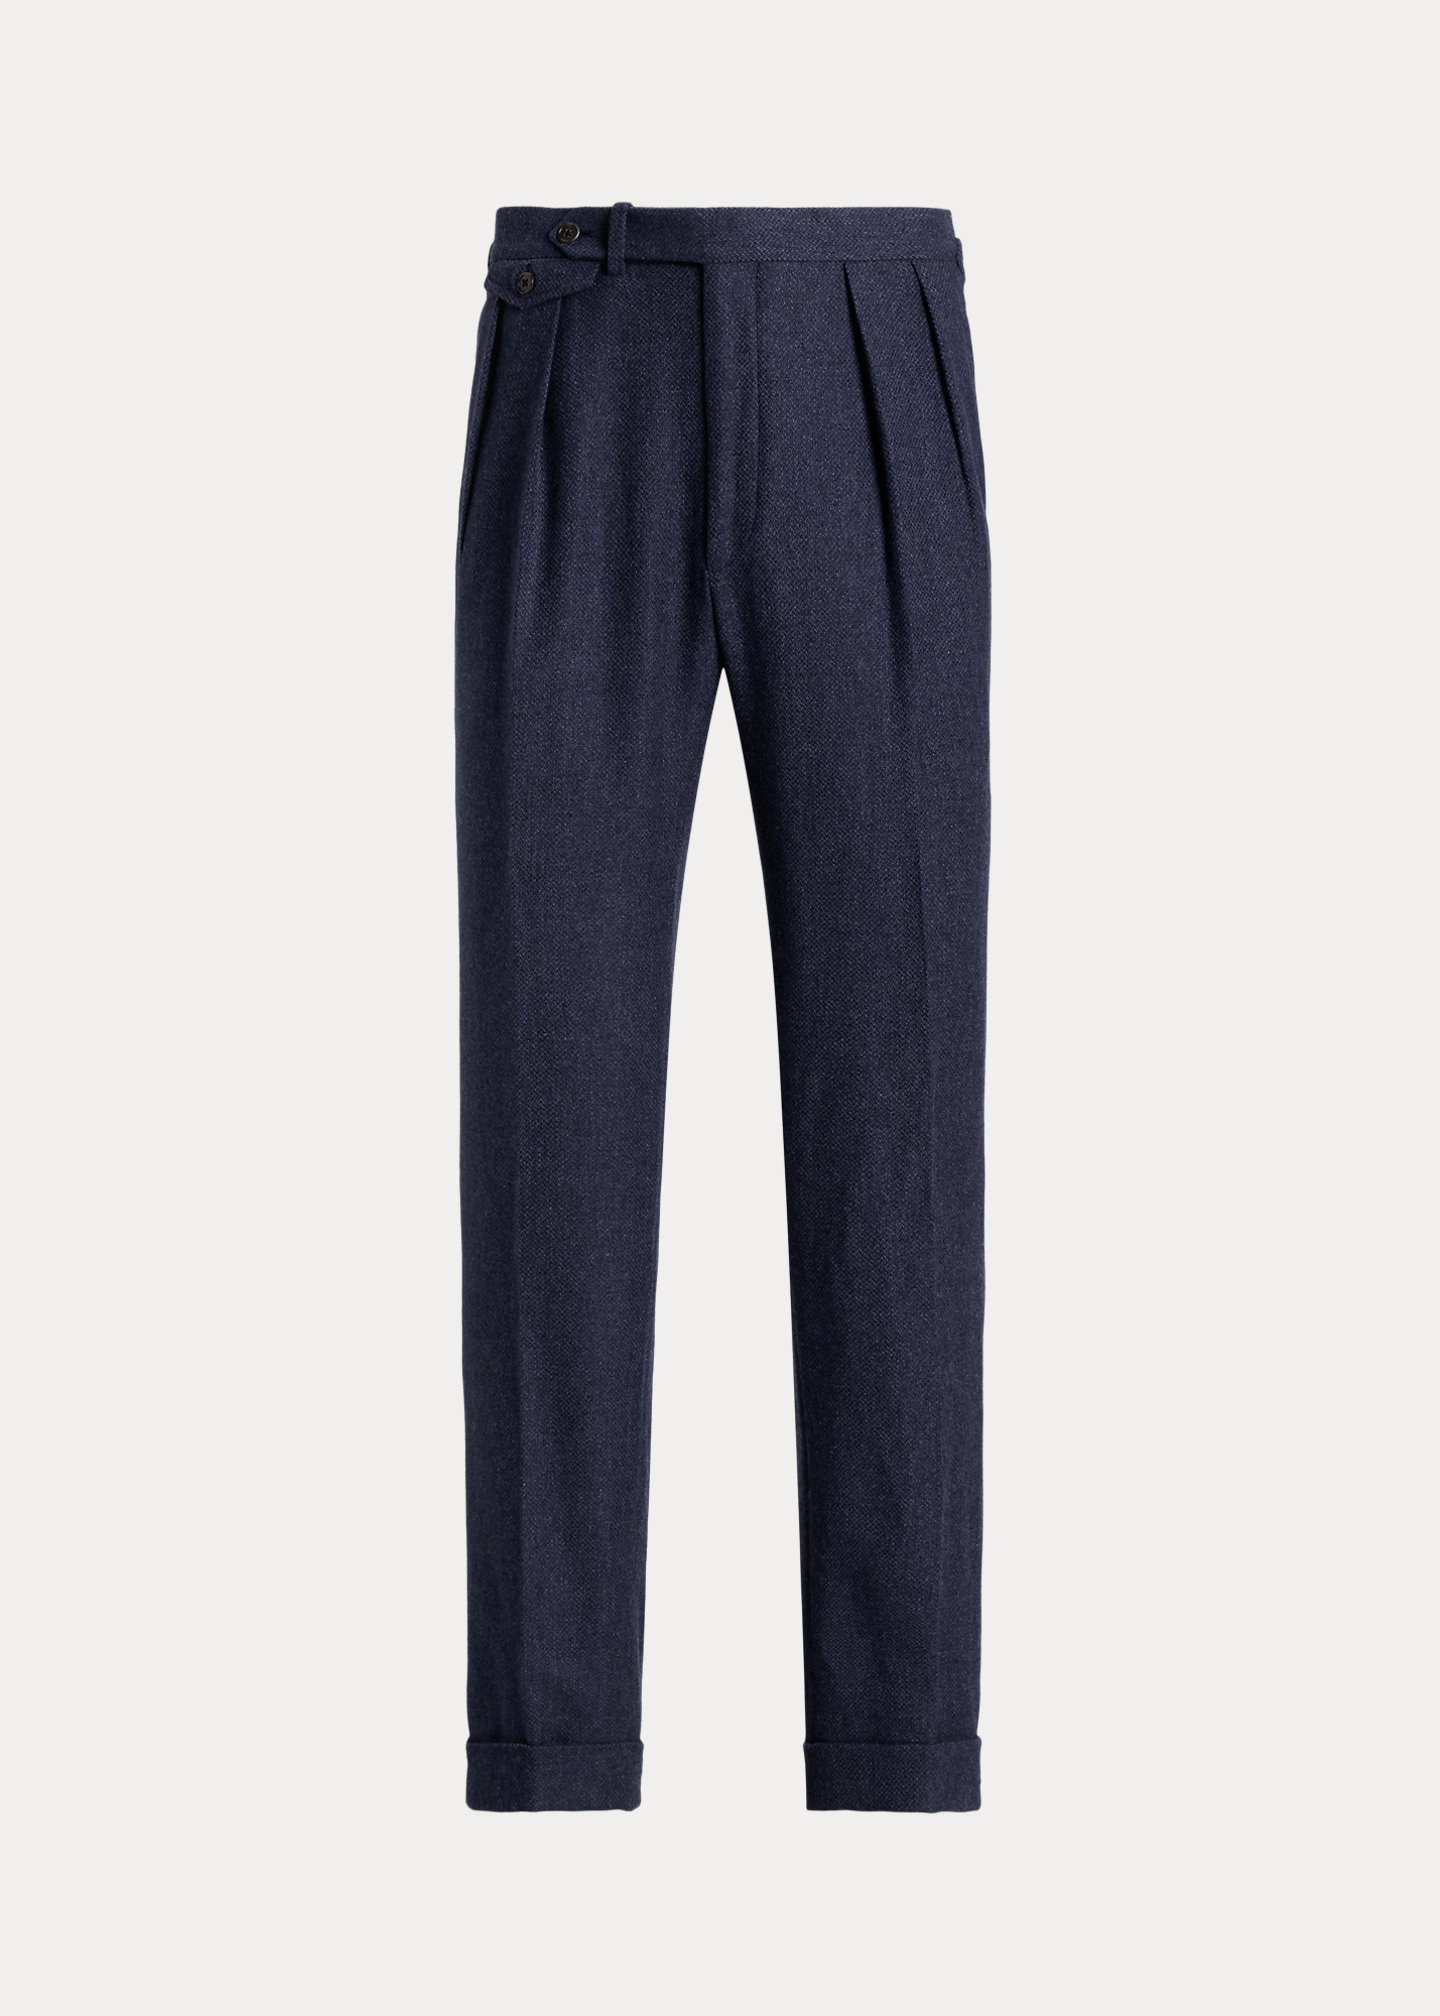 Gregory Hand-Tailored Wool-Blend Trouser